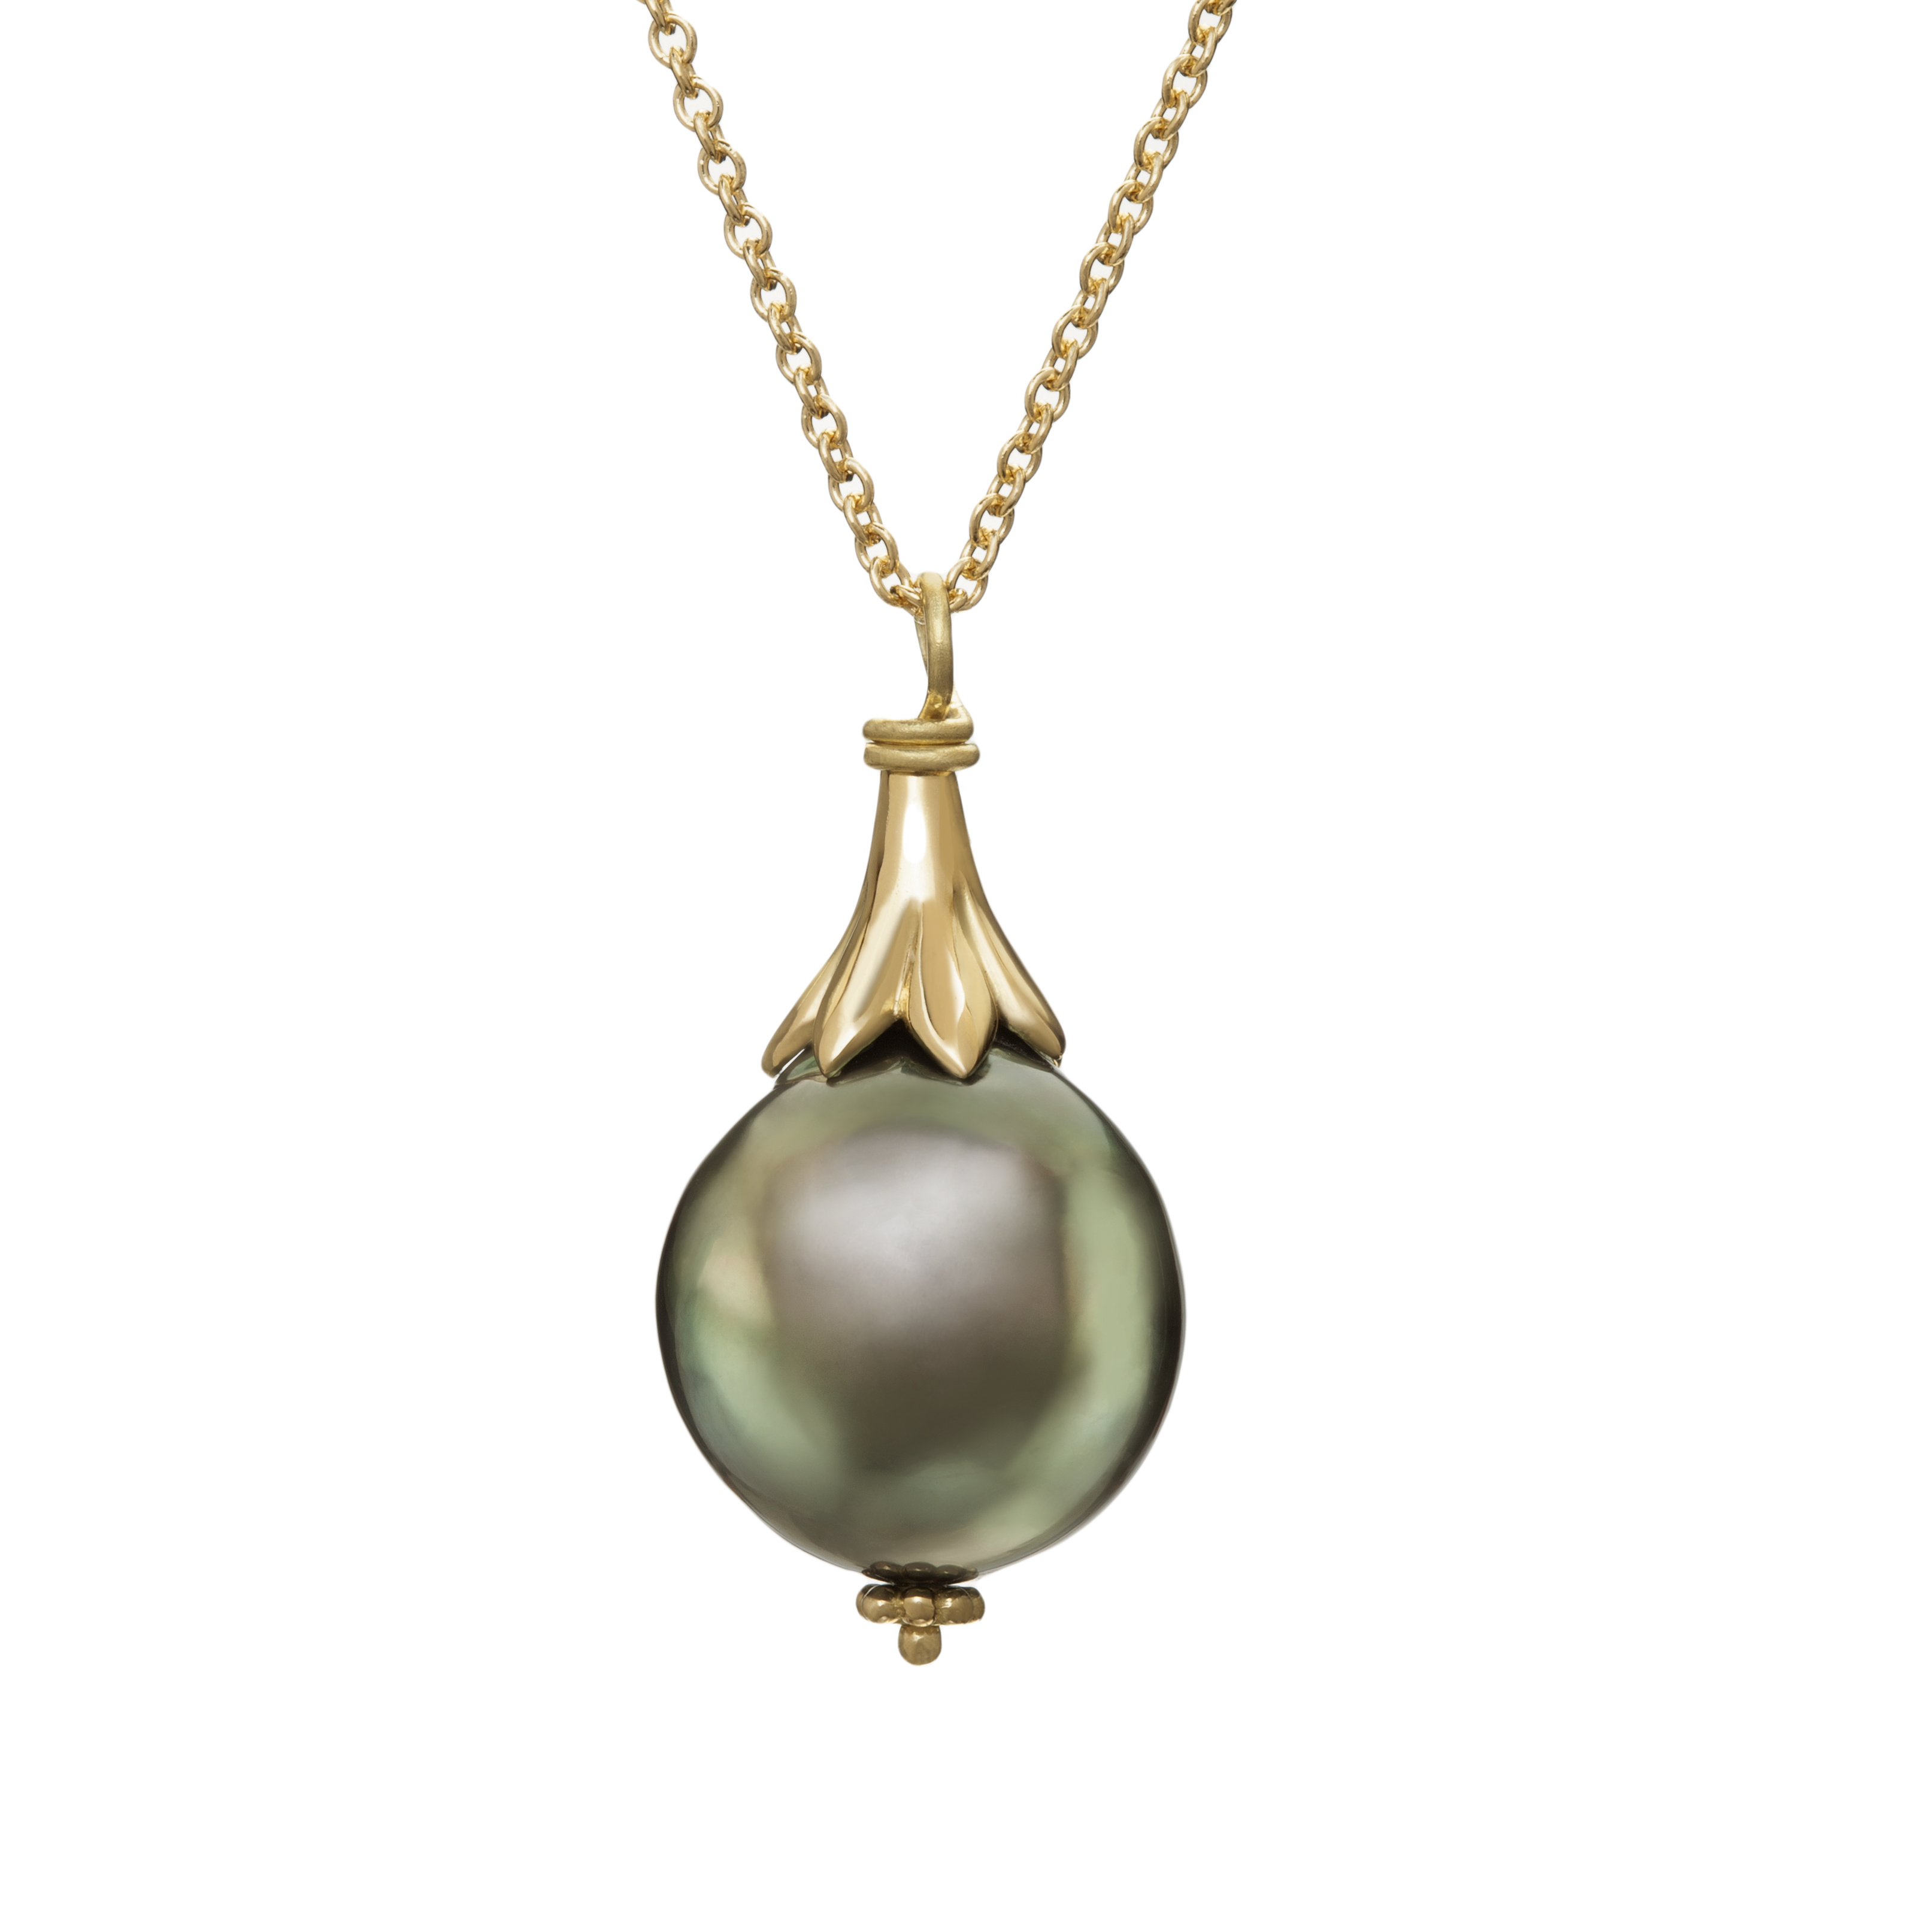 Christina Malle Fairmined Jewelry Berry Leaf 18 Karat Fairmined Gold and Tahitian South Sea Pearl, on Fairmined 18 Karat Gold. The Flora Collection